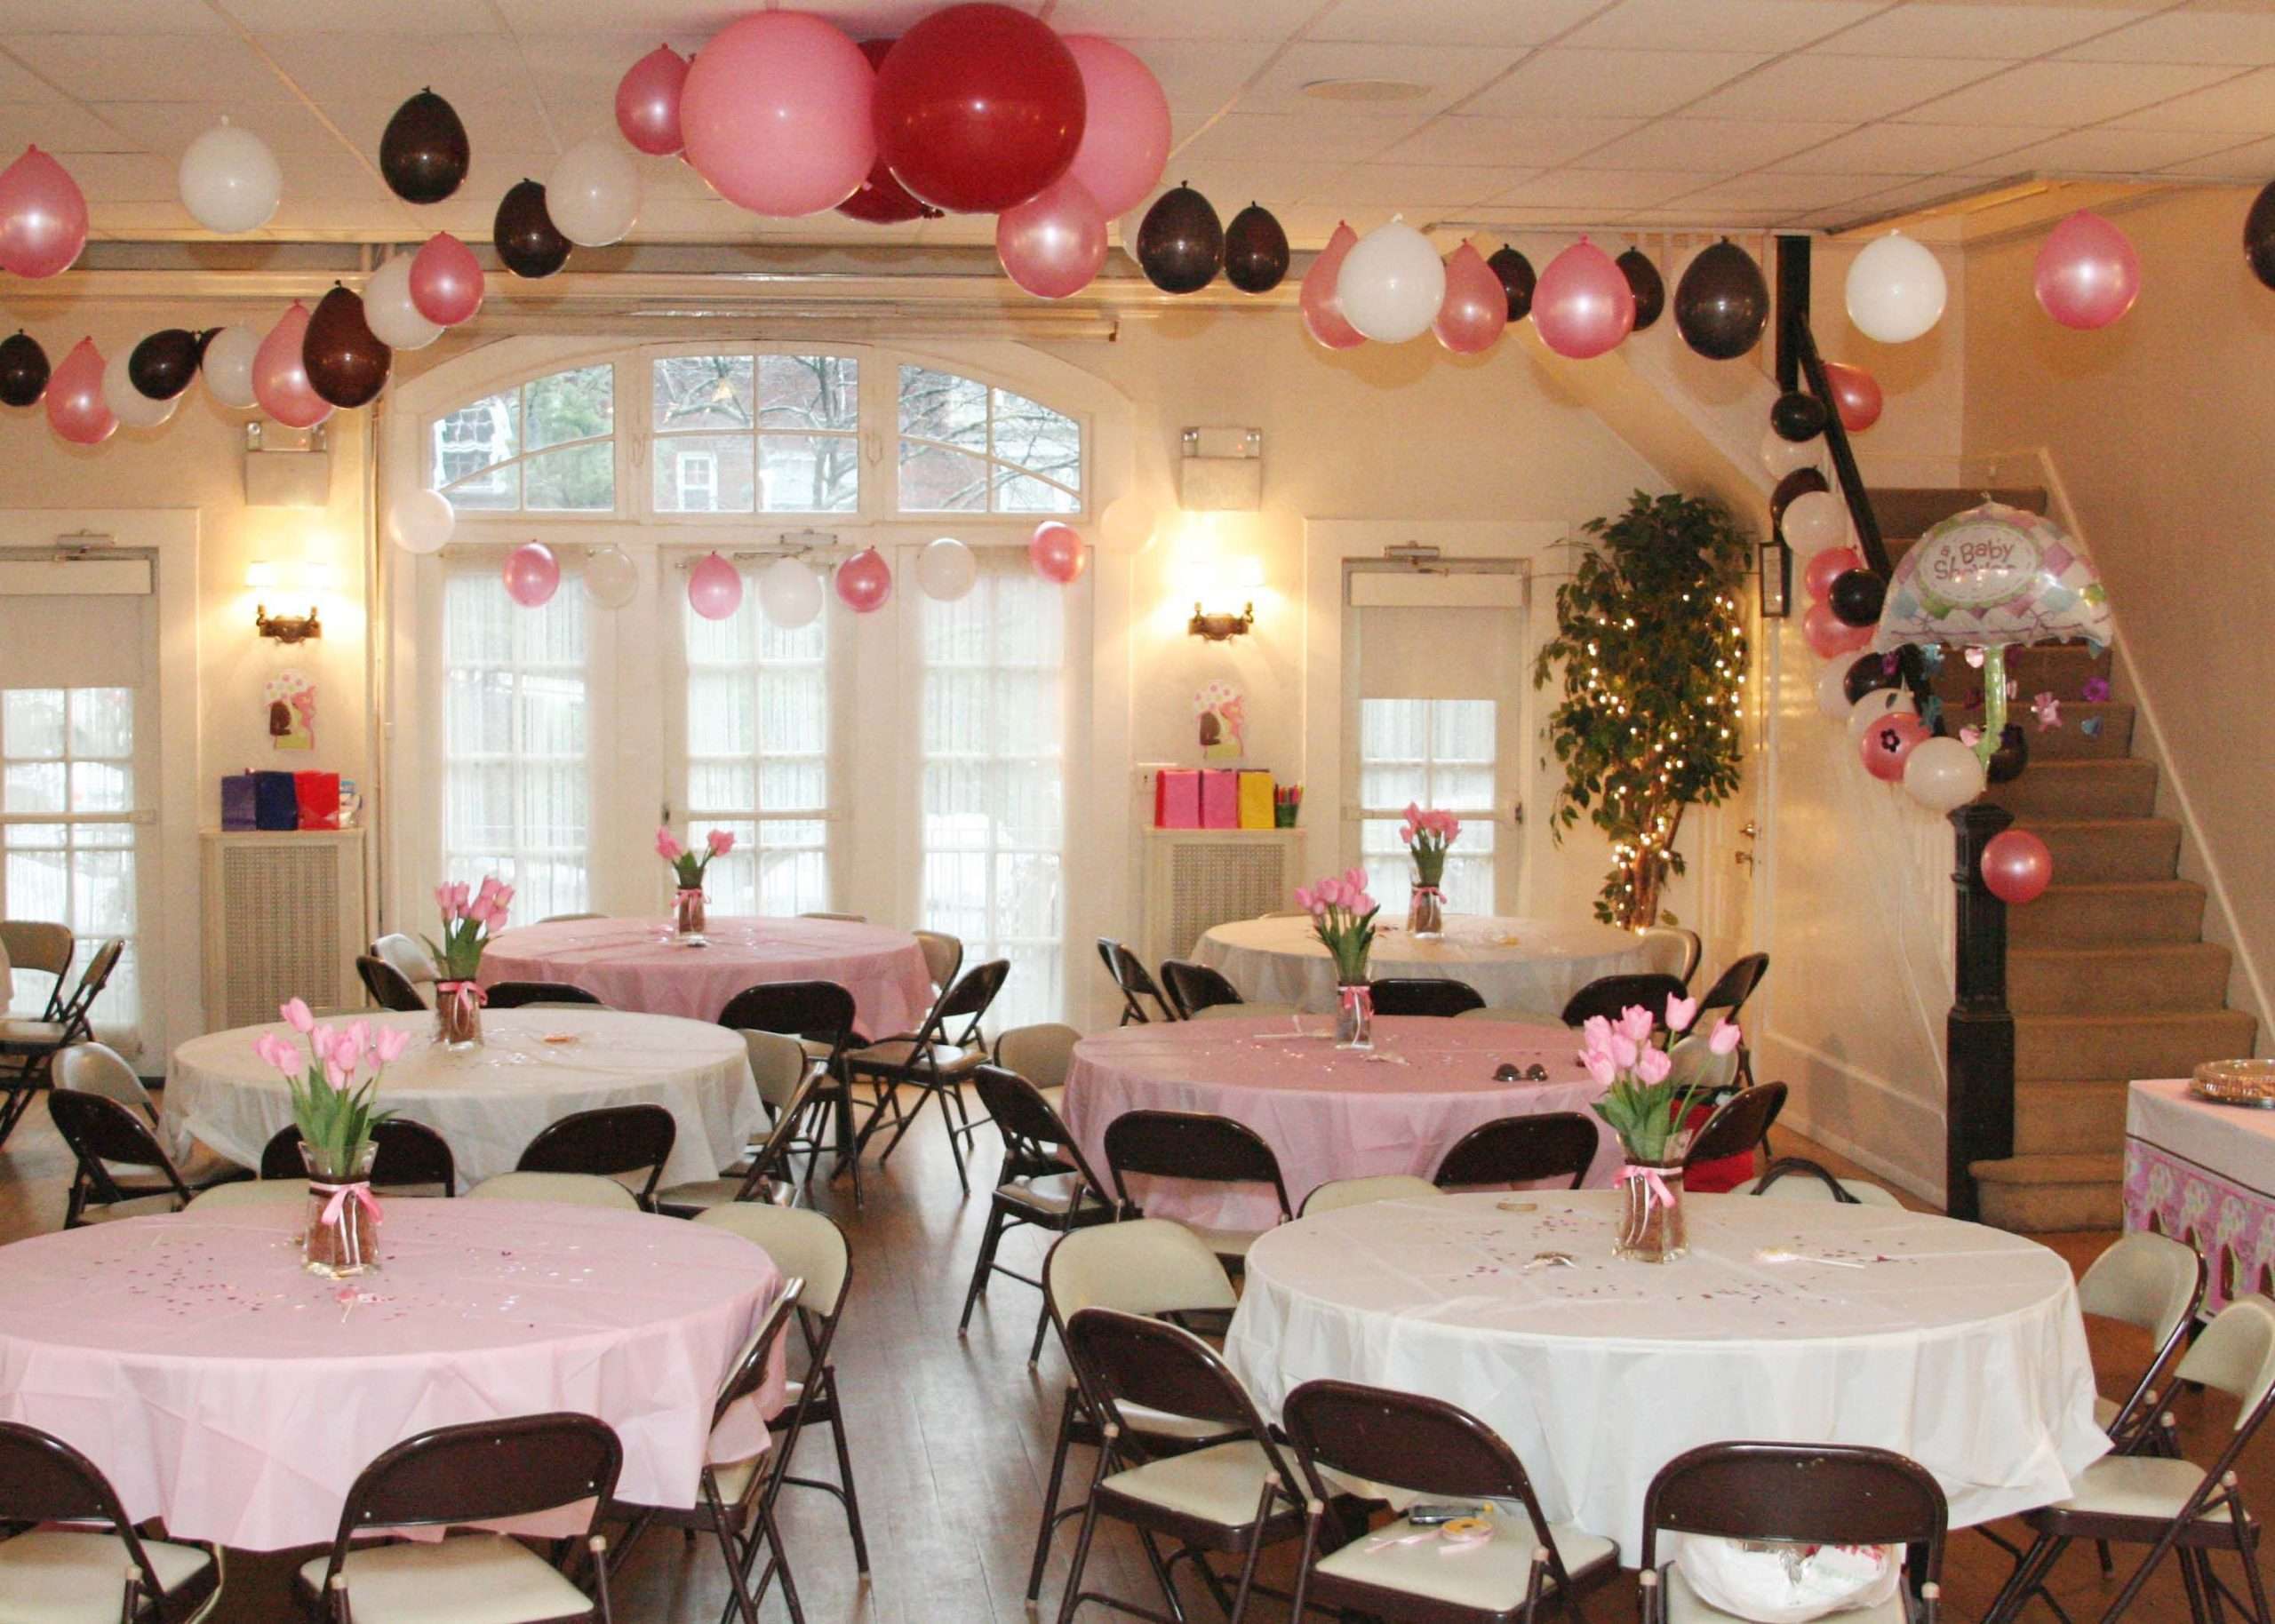 Four J Events Club is an indoor party place located in ...